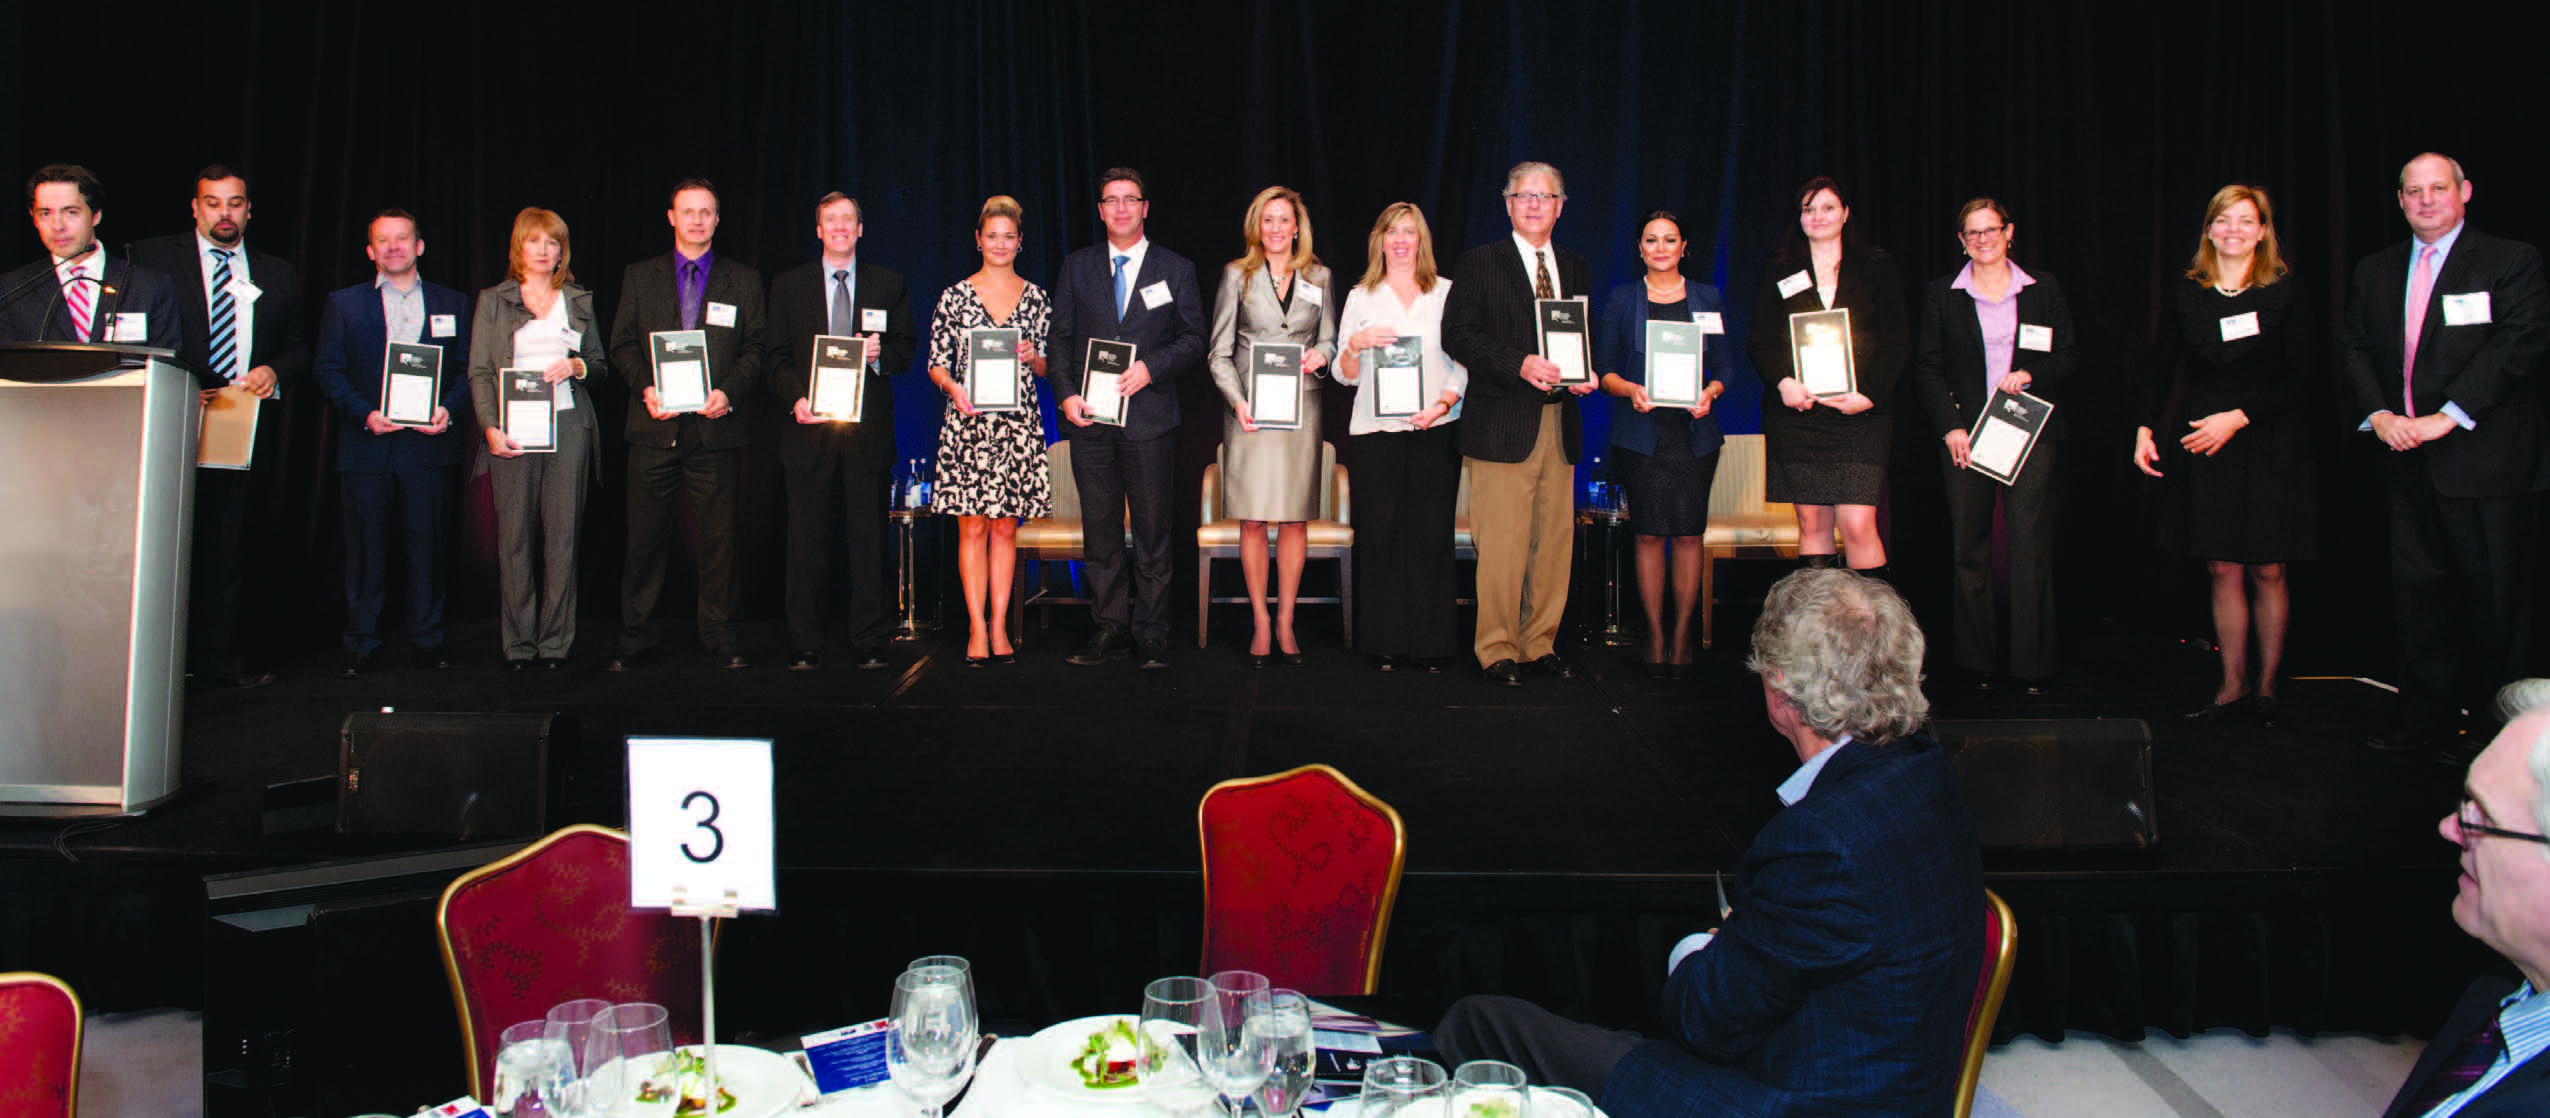 Representatives from some of the Top 50 BSME companies celebrate at an awards reception in Toronto in November